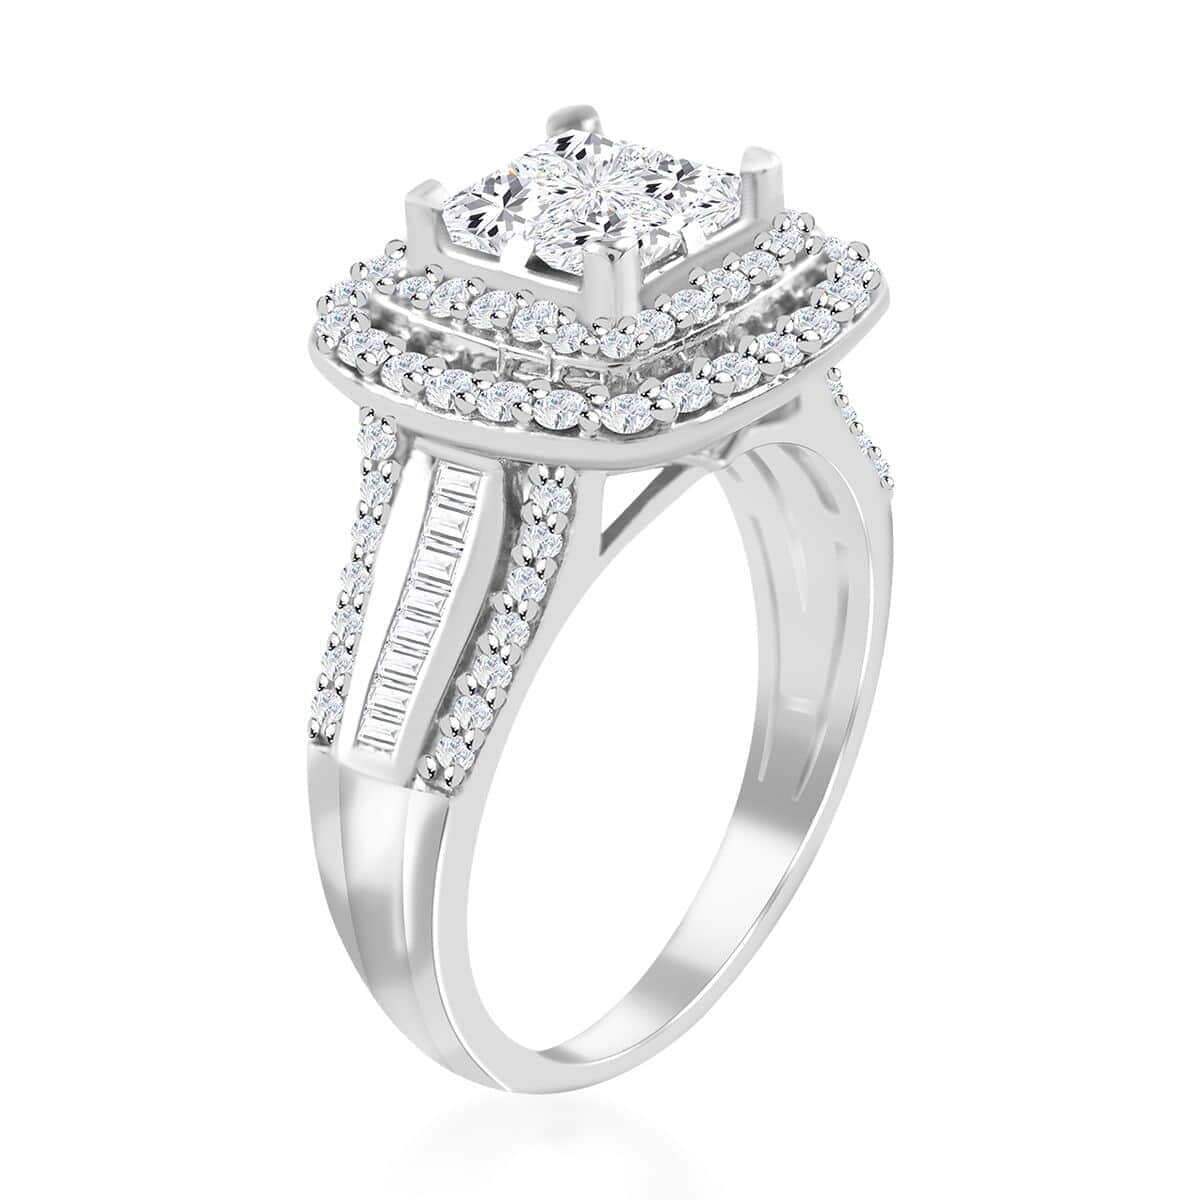 10K White Gold Diamond Ring 5.70 Grams 1.75 ctw (Delivery in 10-15 Business Days) image number 3